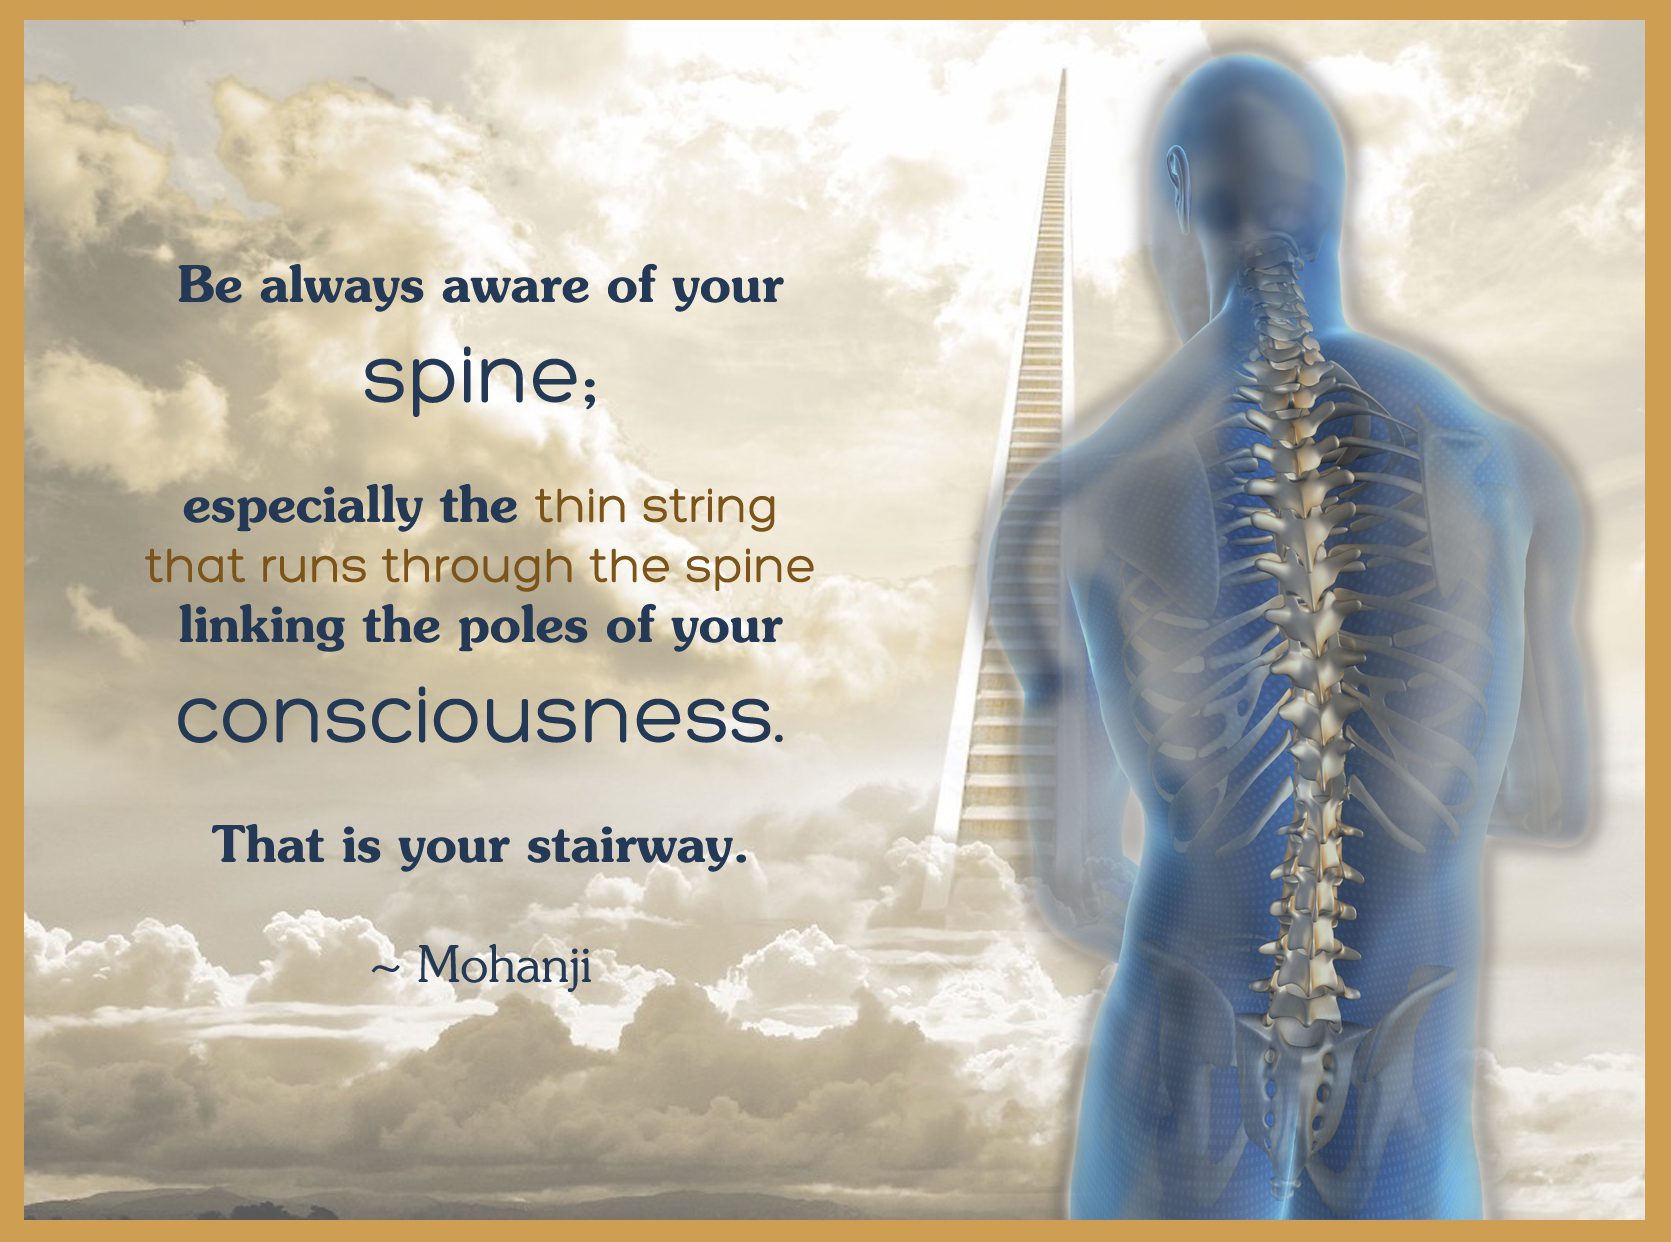 Mohanji quote - be always aware of your spine